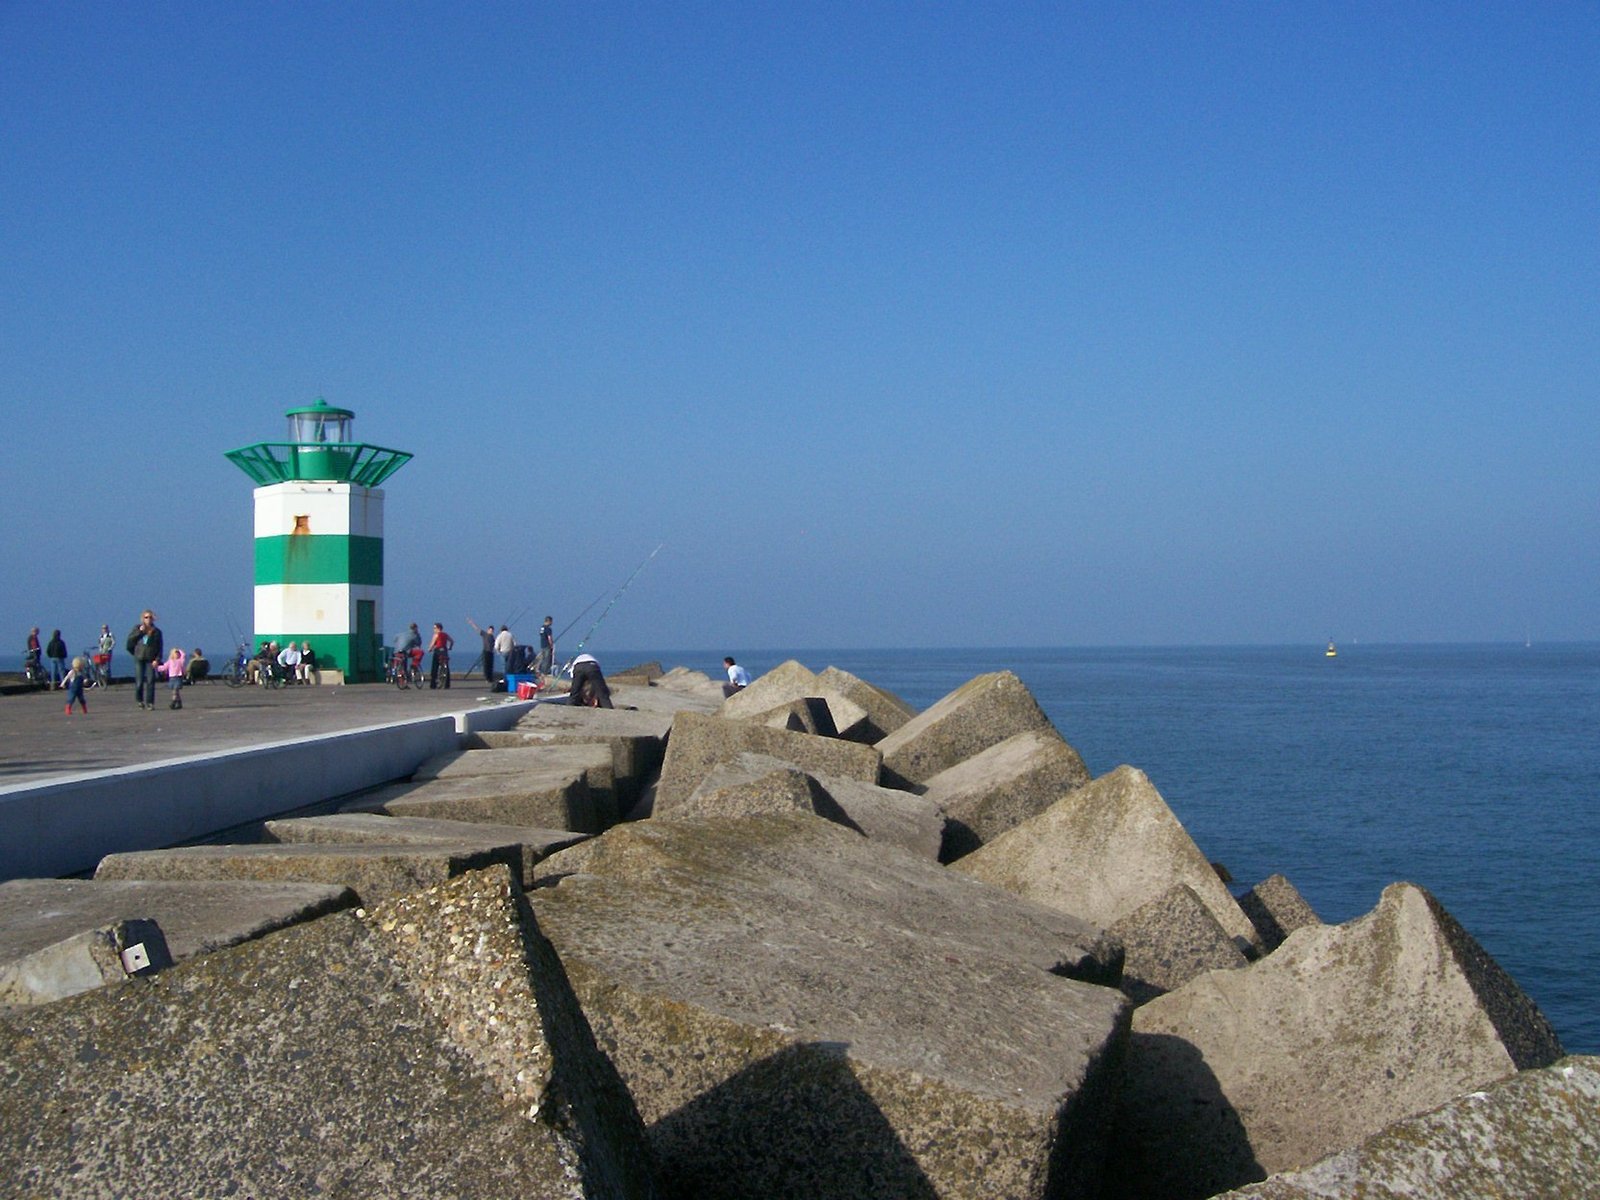 the sea wall has two green and white towers on top